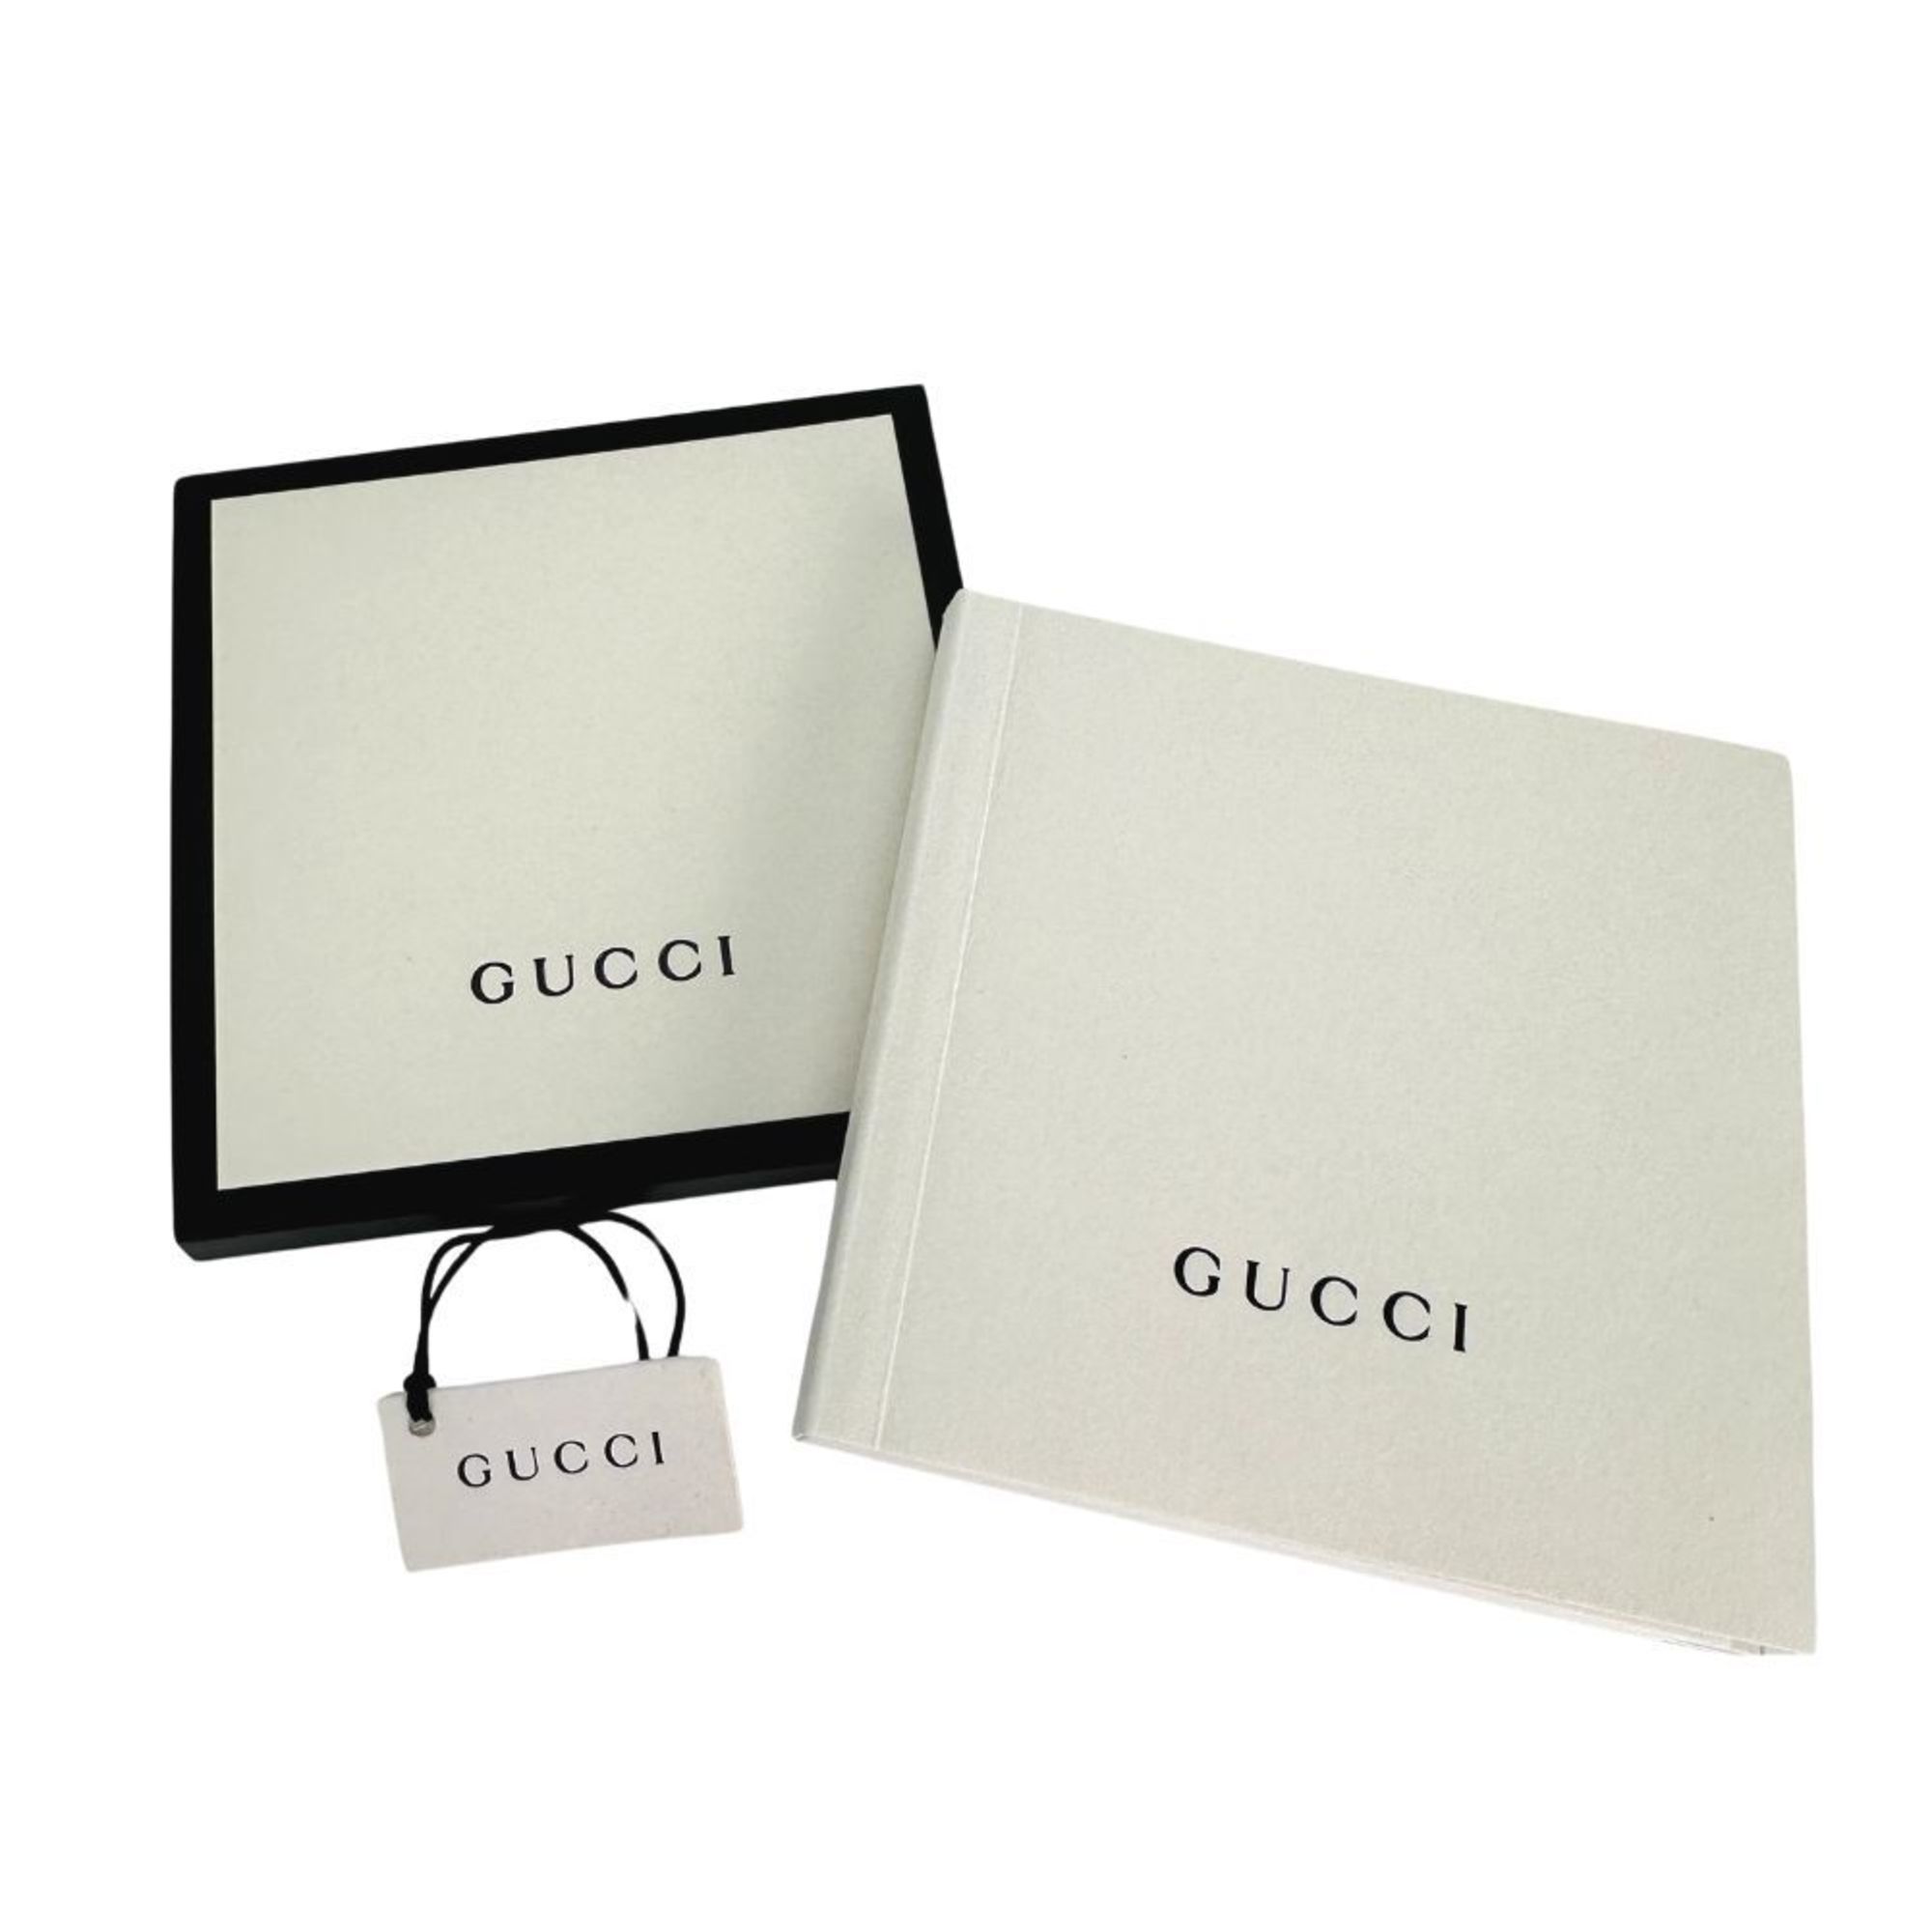 GUCCI Watch 9040L Stainless Steel Swiss Made Silver Quartz Analog Display Black Dial Ladies